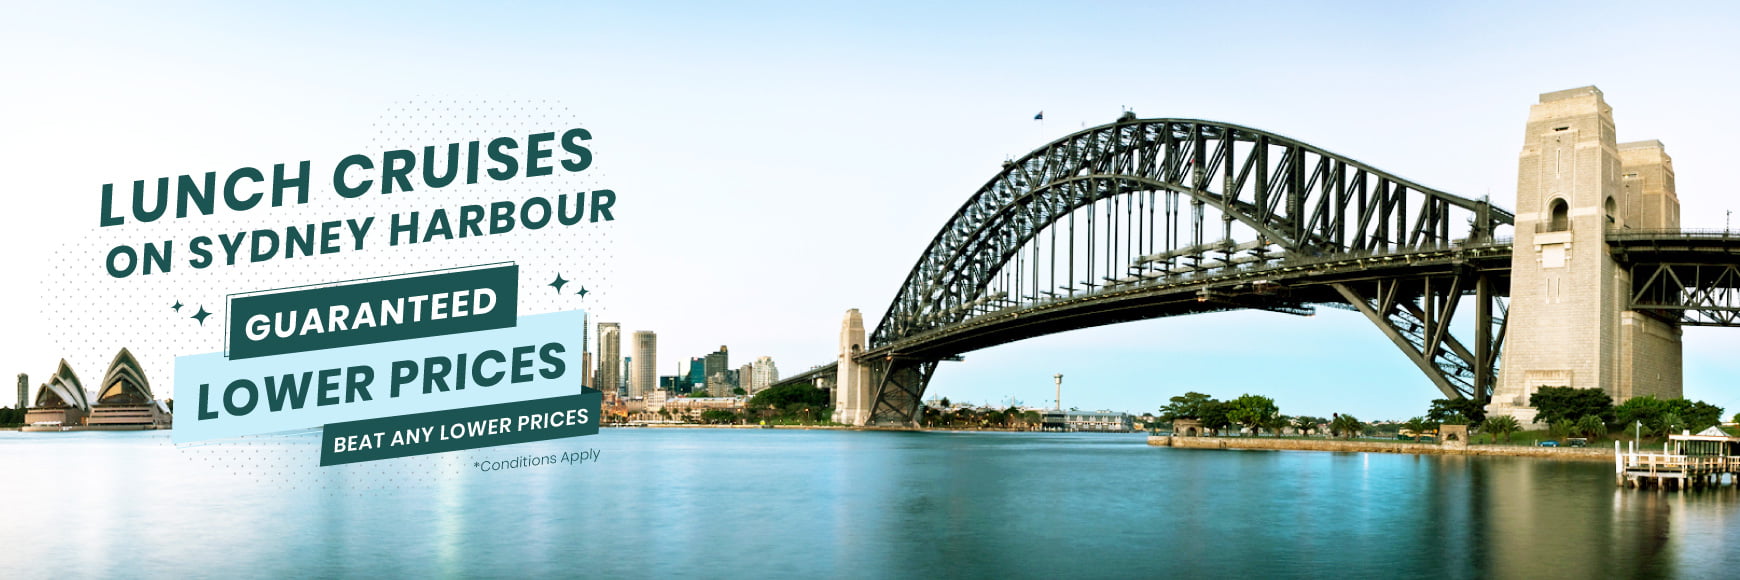 Spectacular lunch cruises on Sydney Harbour at the lowest guaranteed prices